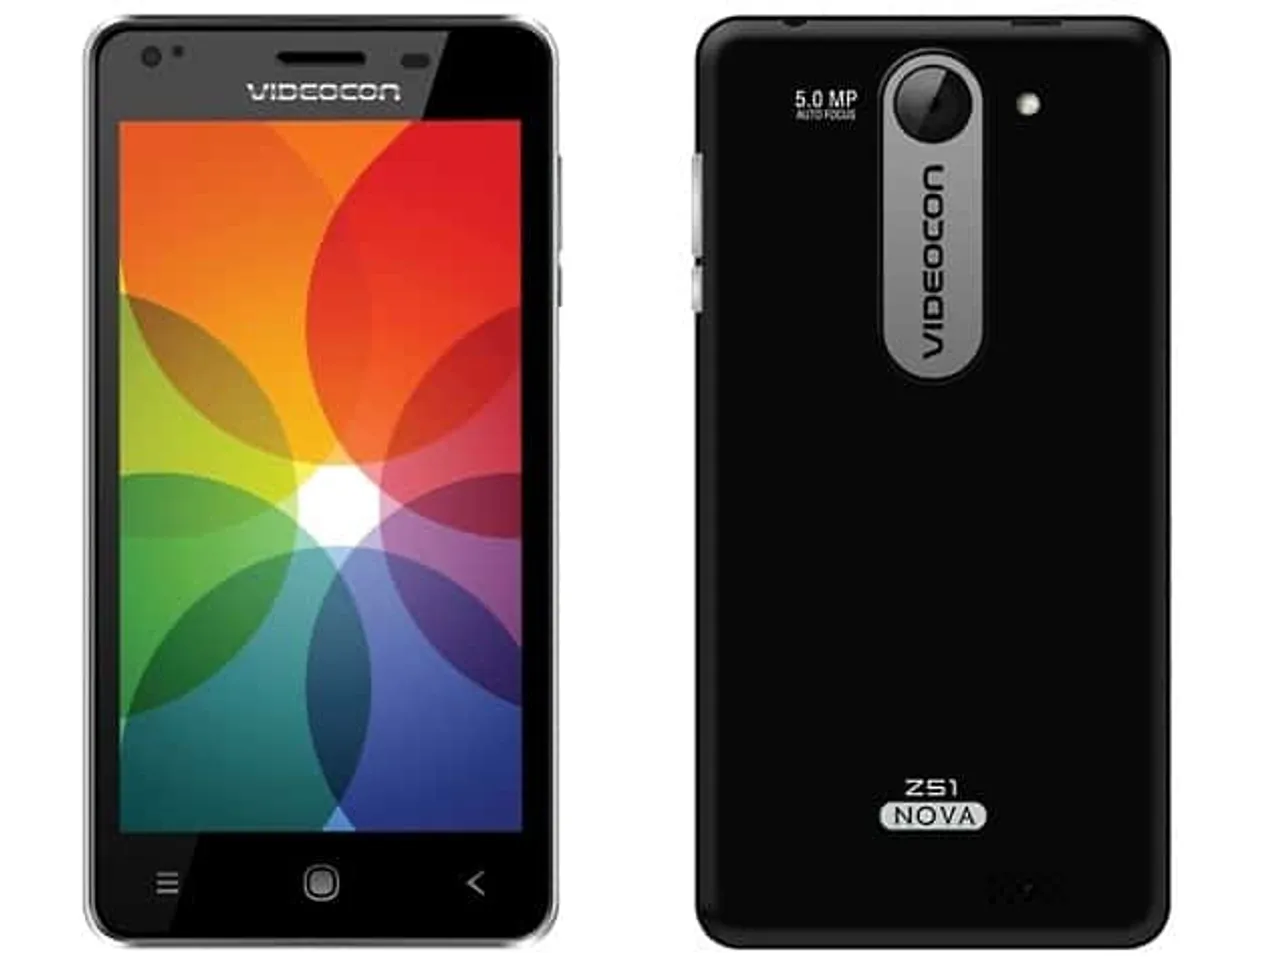 Videocon launches Z51 Nova, priced at Rs 5,400